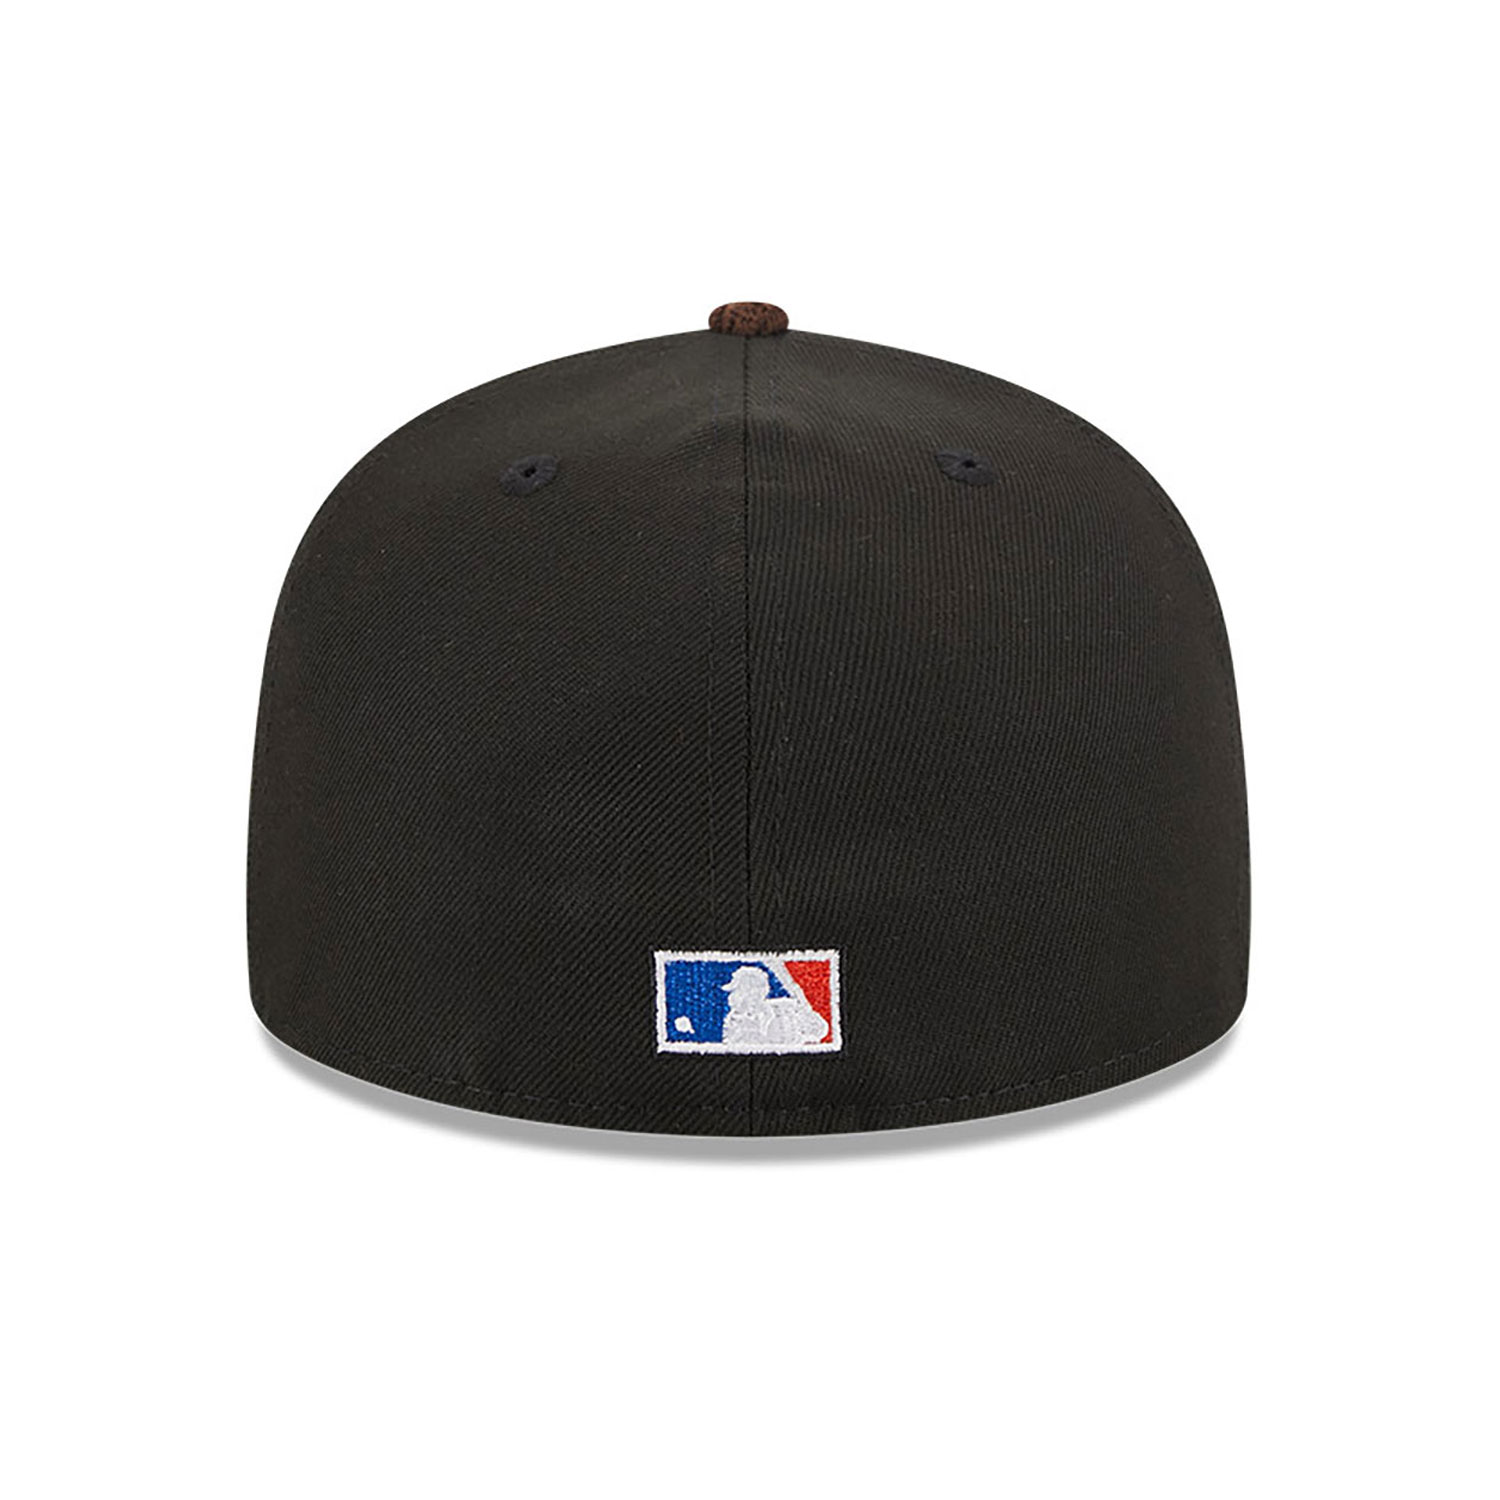 Arizona Diamondbacks MLB Cooperstown Feathered Cord Black 59FIFTY Fitted Cap